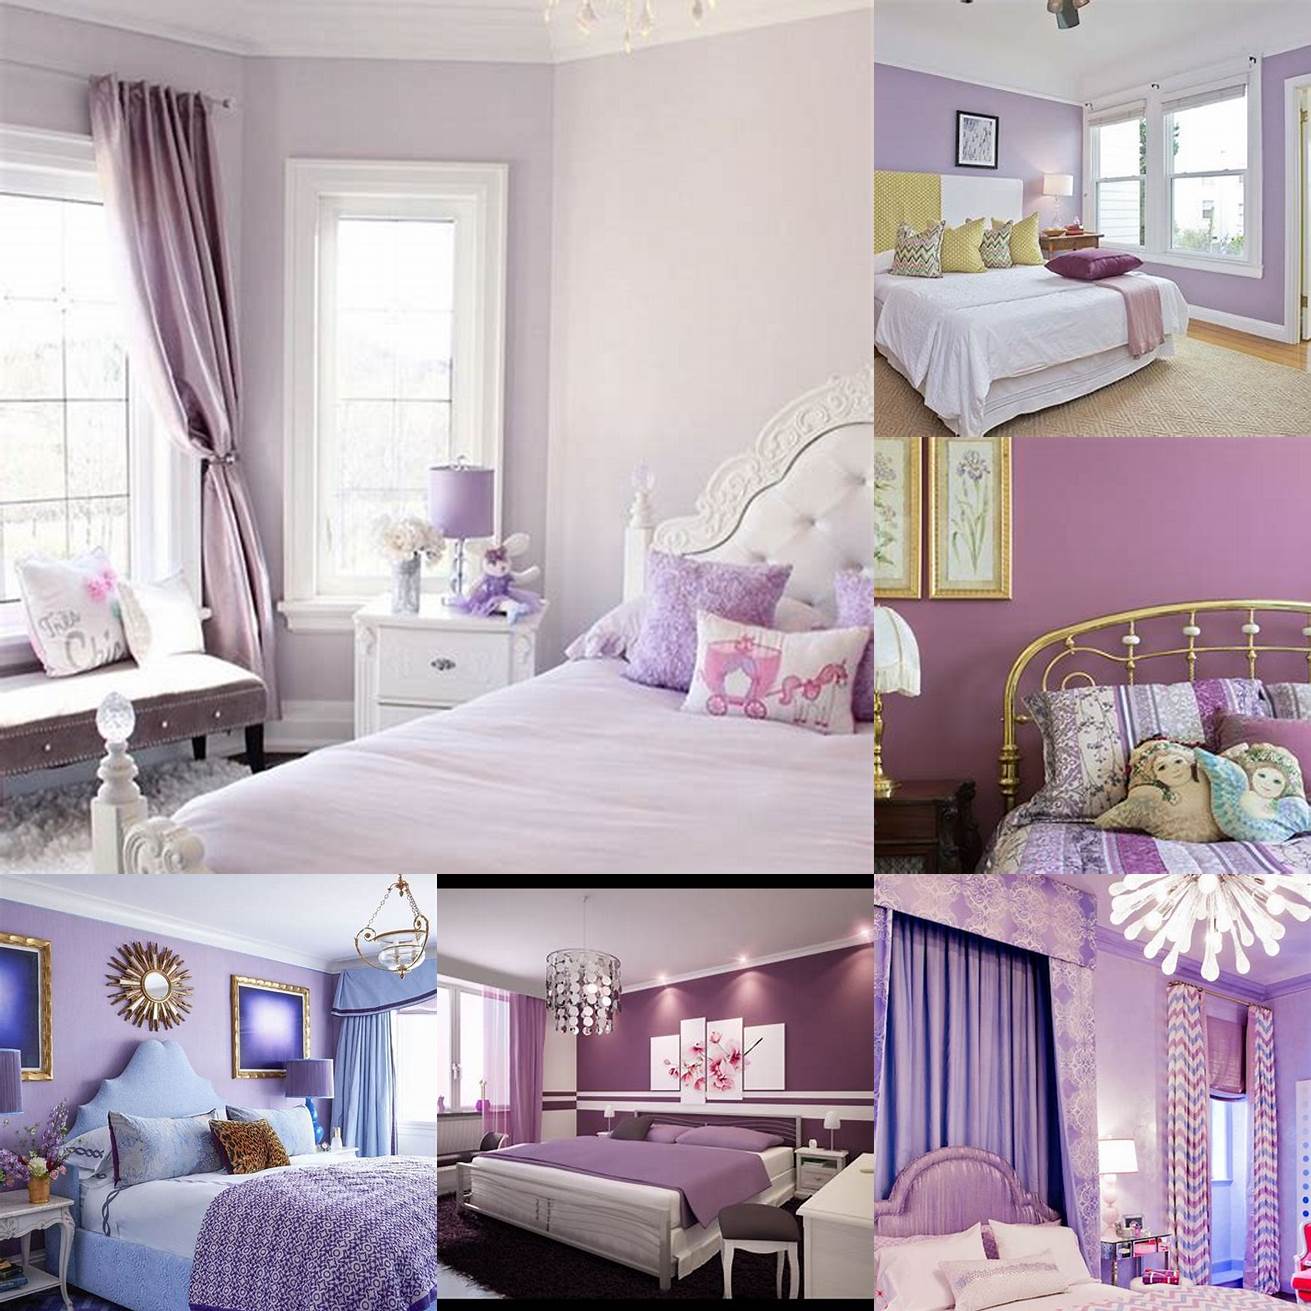 A lavender or purple bedroom can create a peaceful and relaxing atmosphere